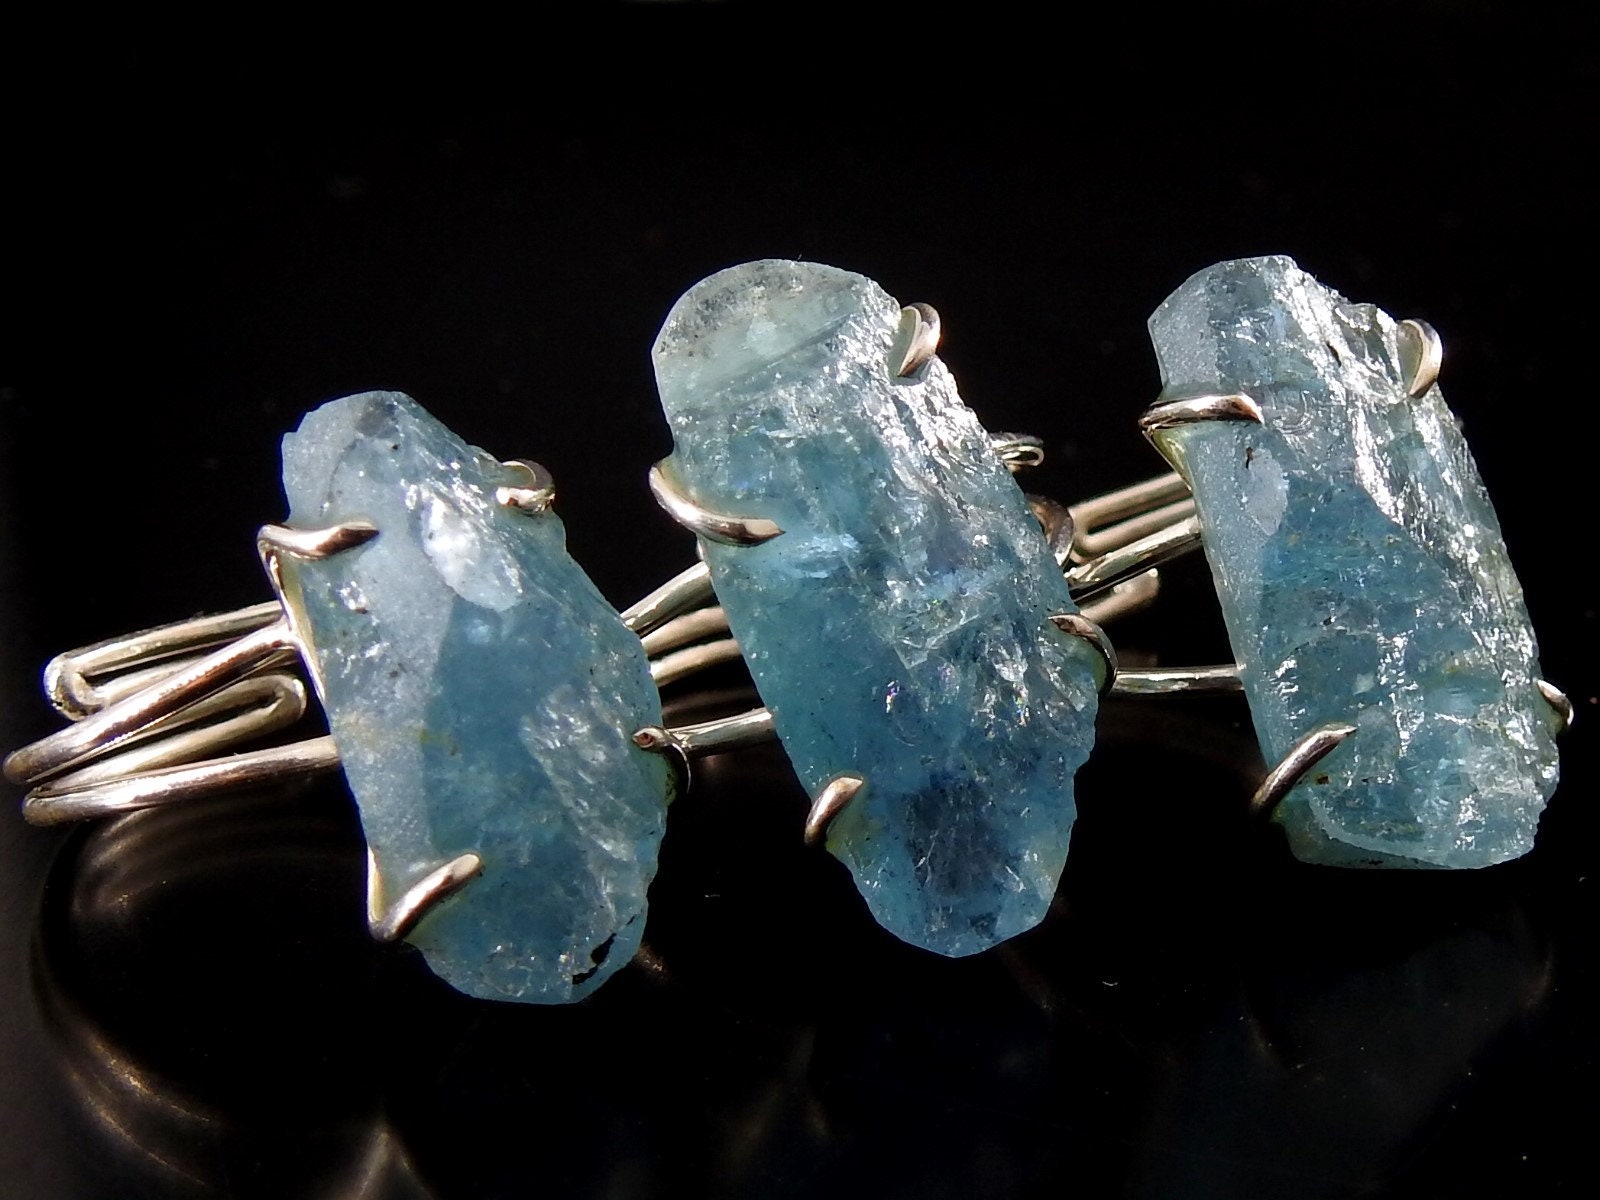 Aquamarine Natural Rough Rings/925 Sterling Silver Jewelry/Adjustable/Loose Raw/Wire-Wrapped/Minerals Stone/One Of A Kind/20-22MM Long/CJ-1 | Save 33% - Rajasthan Living 14